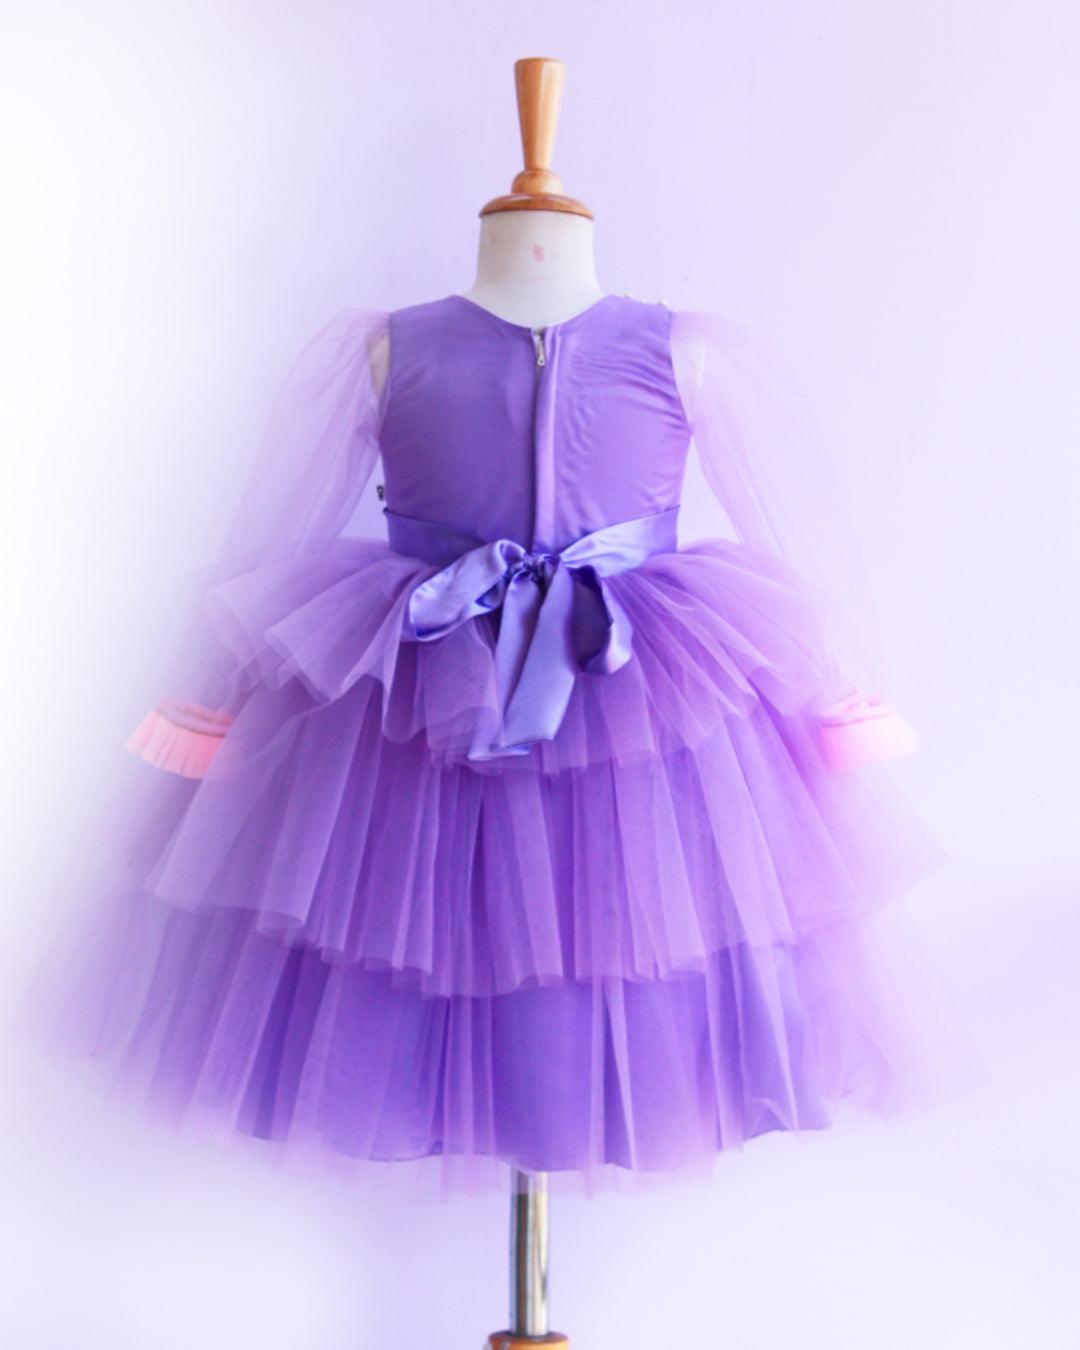 Lavender Butterfly Applique step Frock.
Material: Lavender Shade Butterfly Applique three step frock.Premium quality lilac colour satin is used as the lining and lavender colour nylon net is used in three